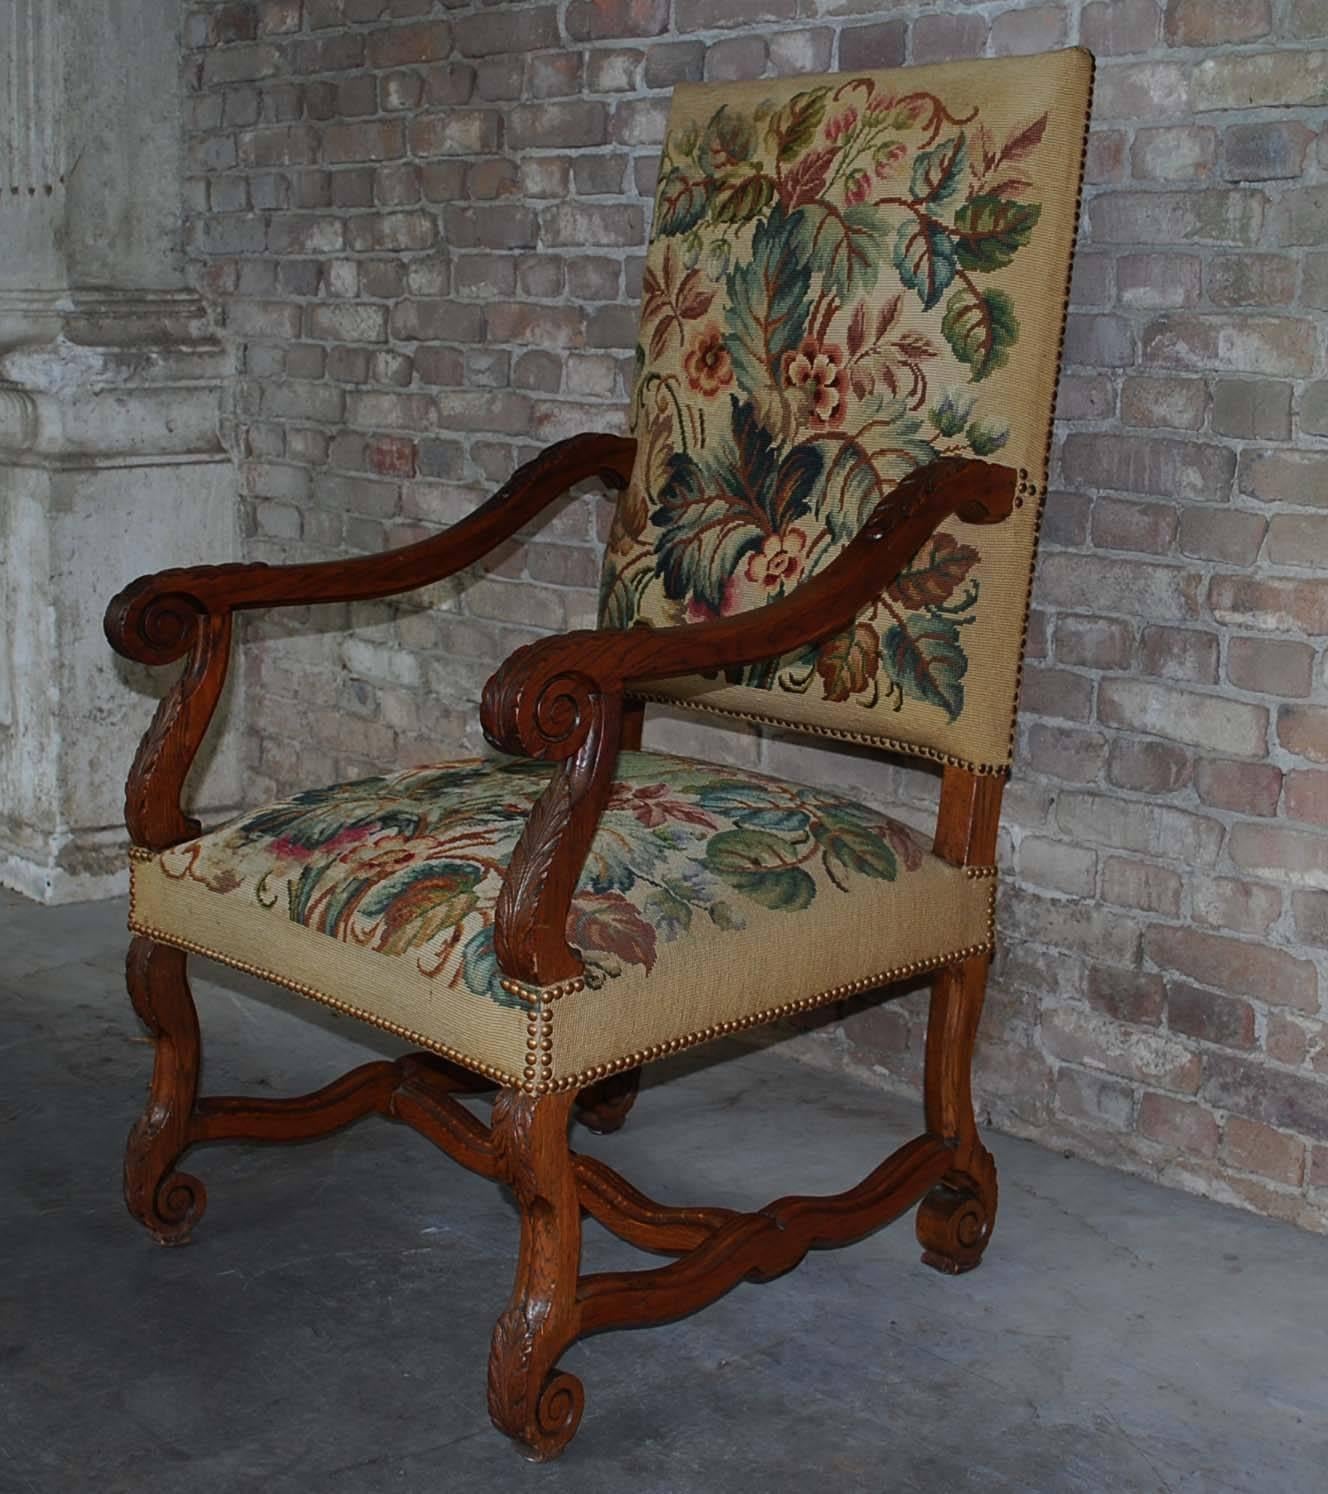 A beautiful antique chair with a solid oak handcarved frame and needlepoint upholstery.
The oak frame has the classical accanthus leaf motifs on both the armrests as well as its legs.
The upholstery is in good condition.